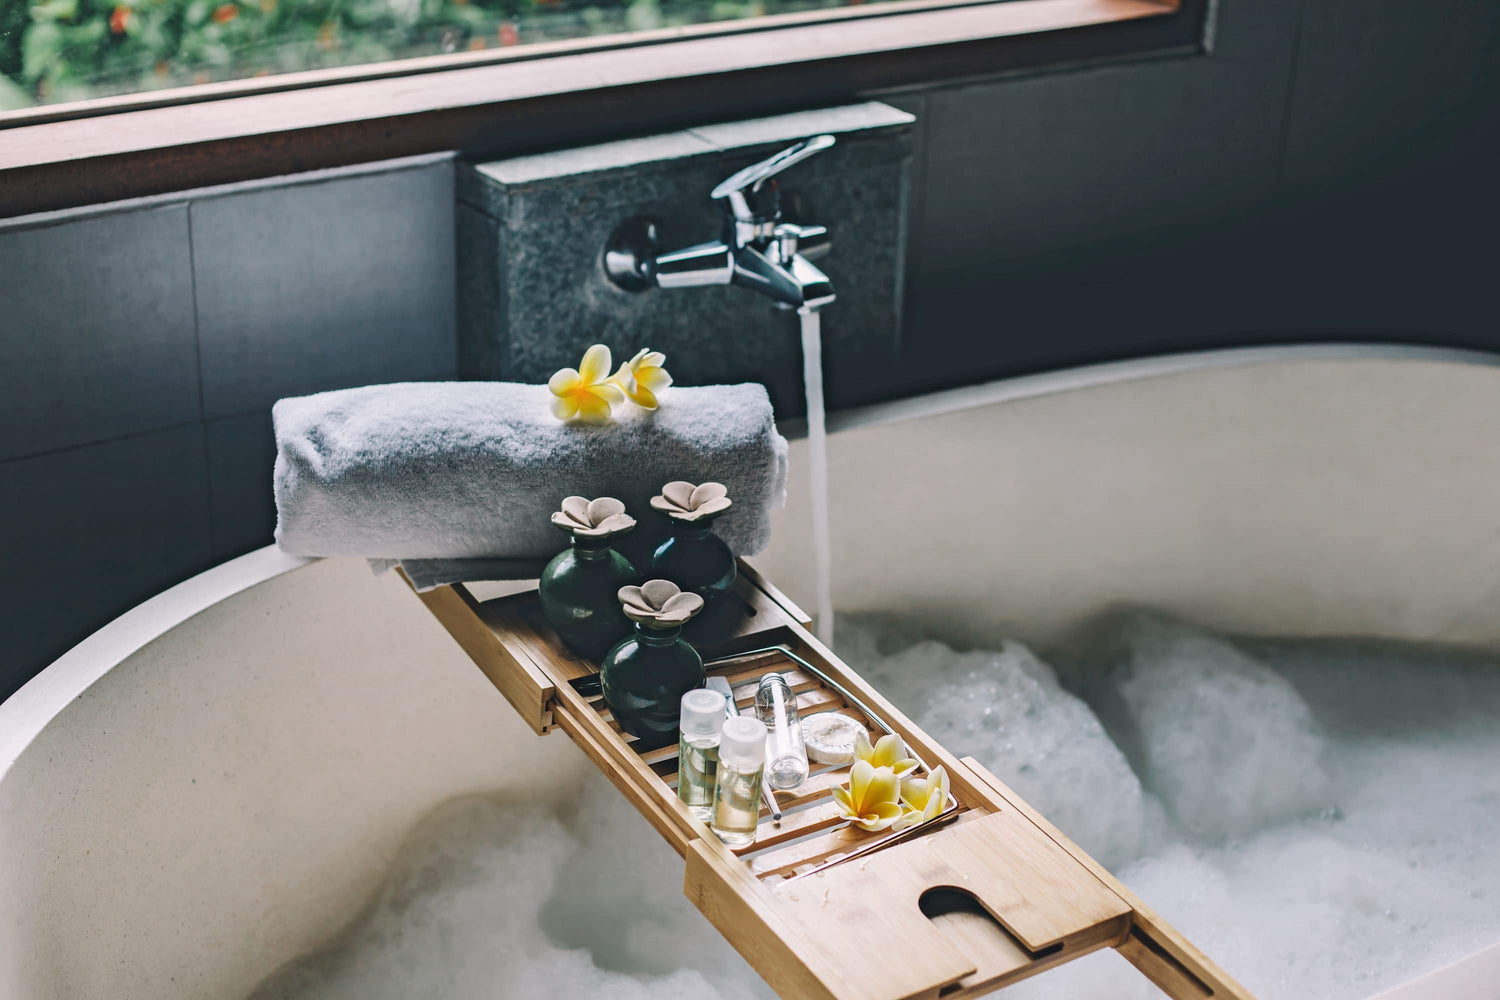 Crystal Bath Therapy: What are the Benefits & Which Crystals Should I Use?